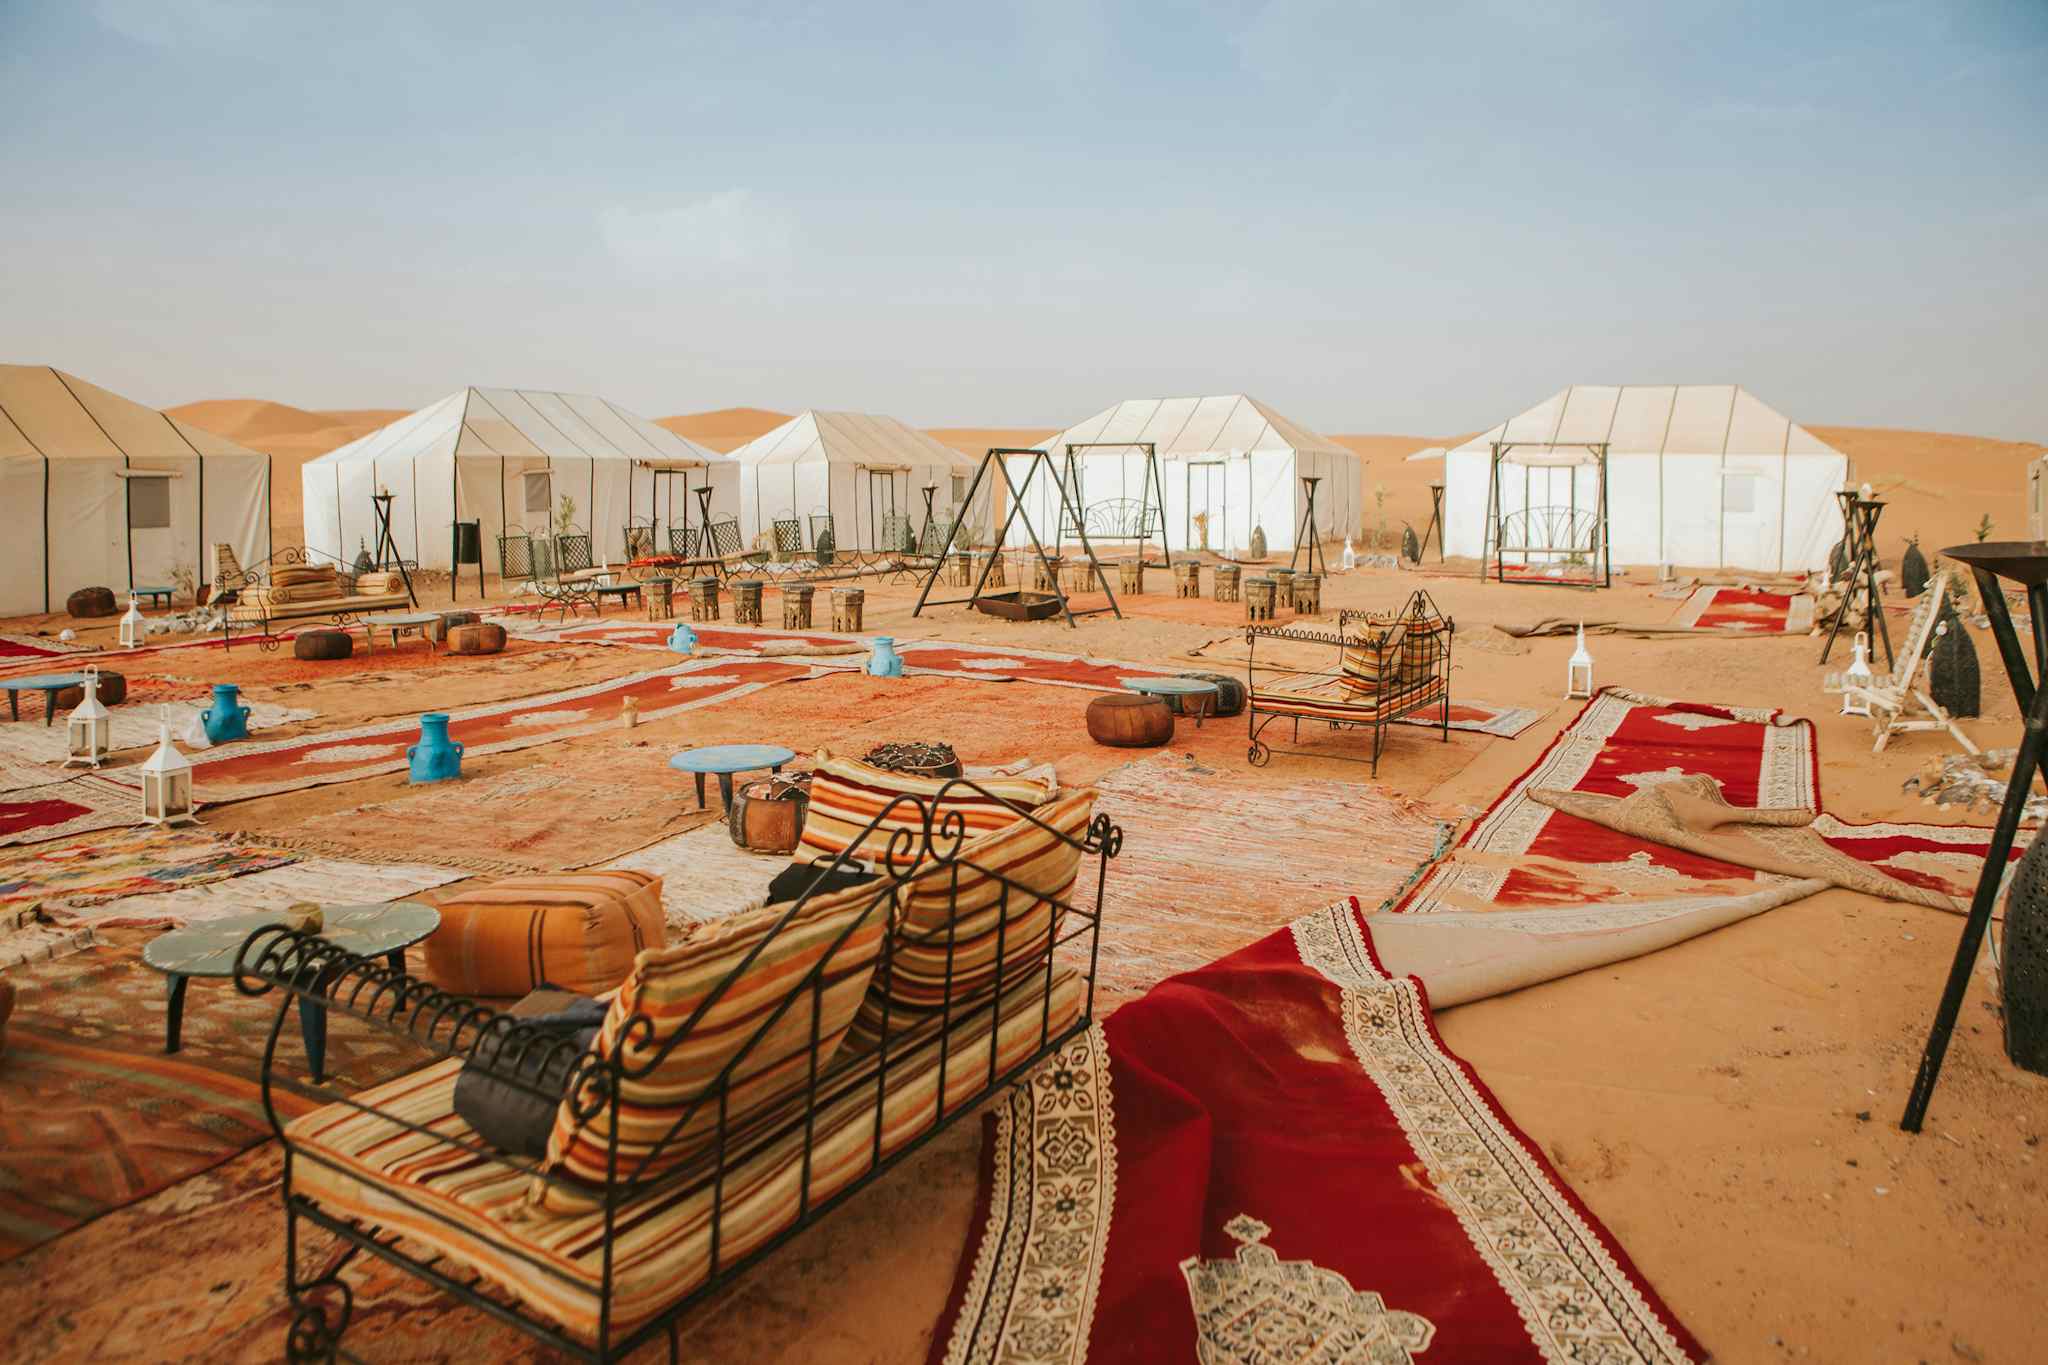 Beautiful desert camp courtyard at sunset, Morocco. Photo: GettyImages-1186914648